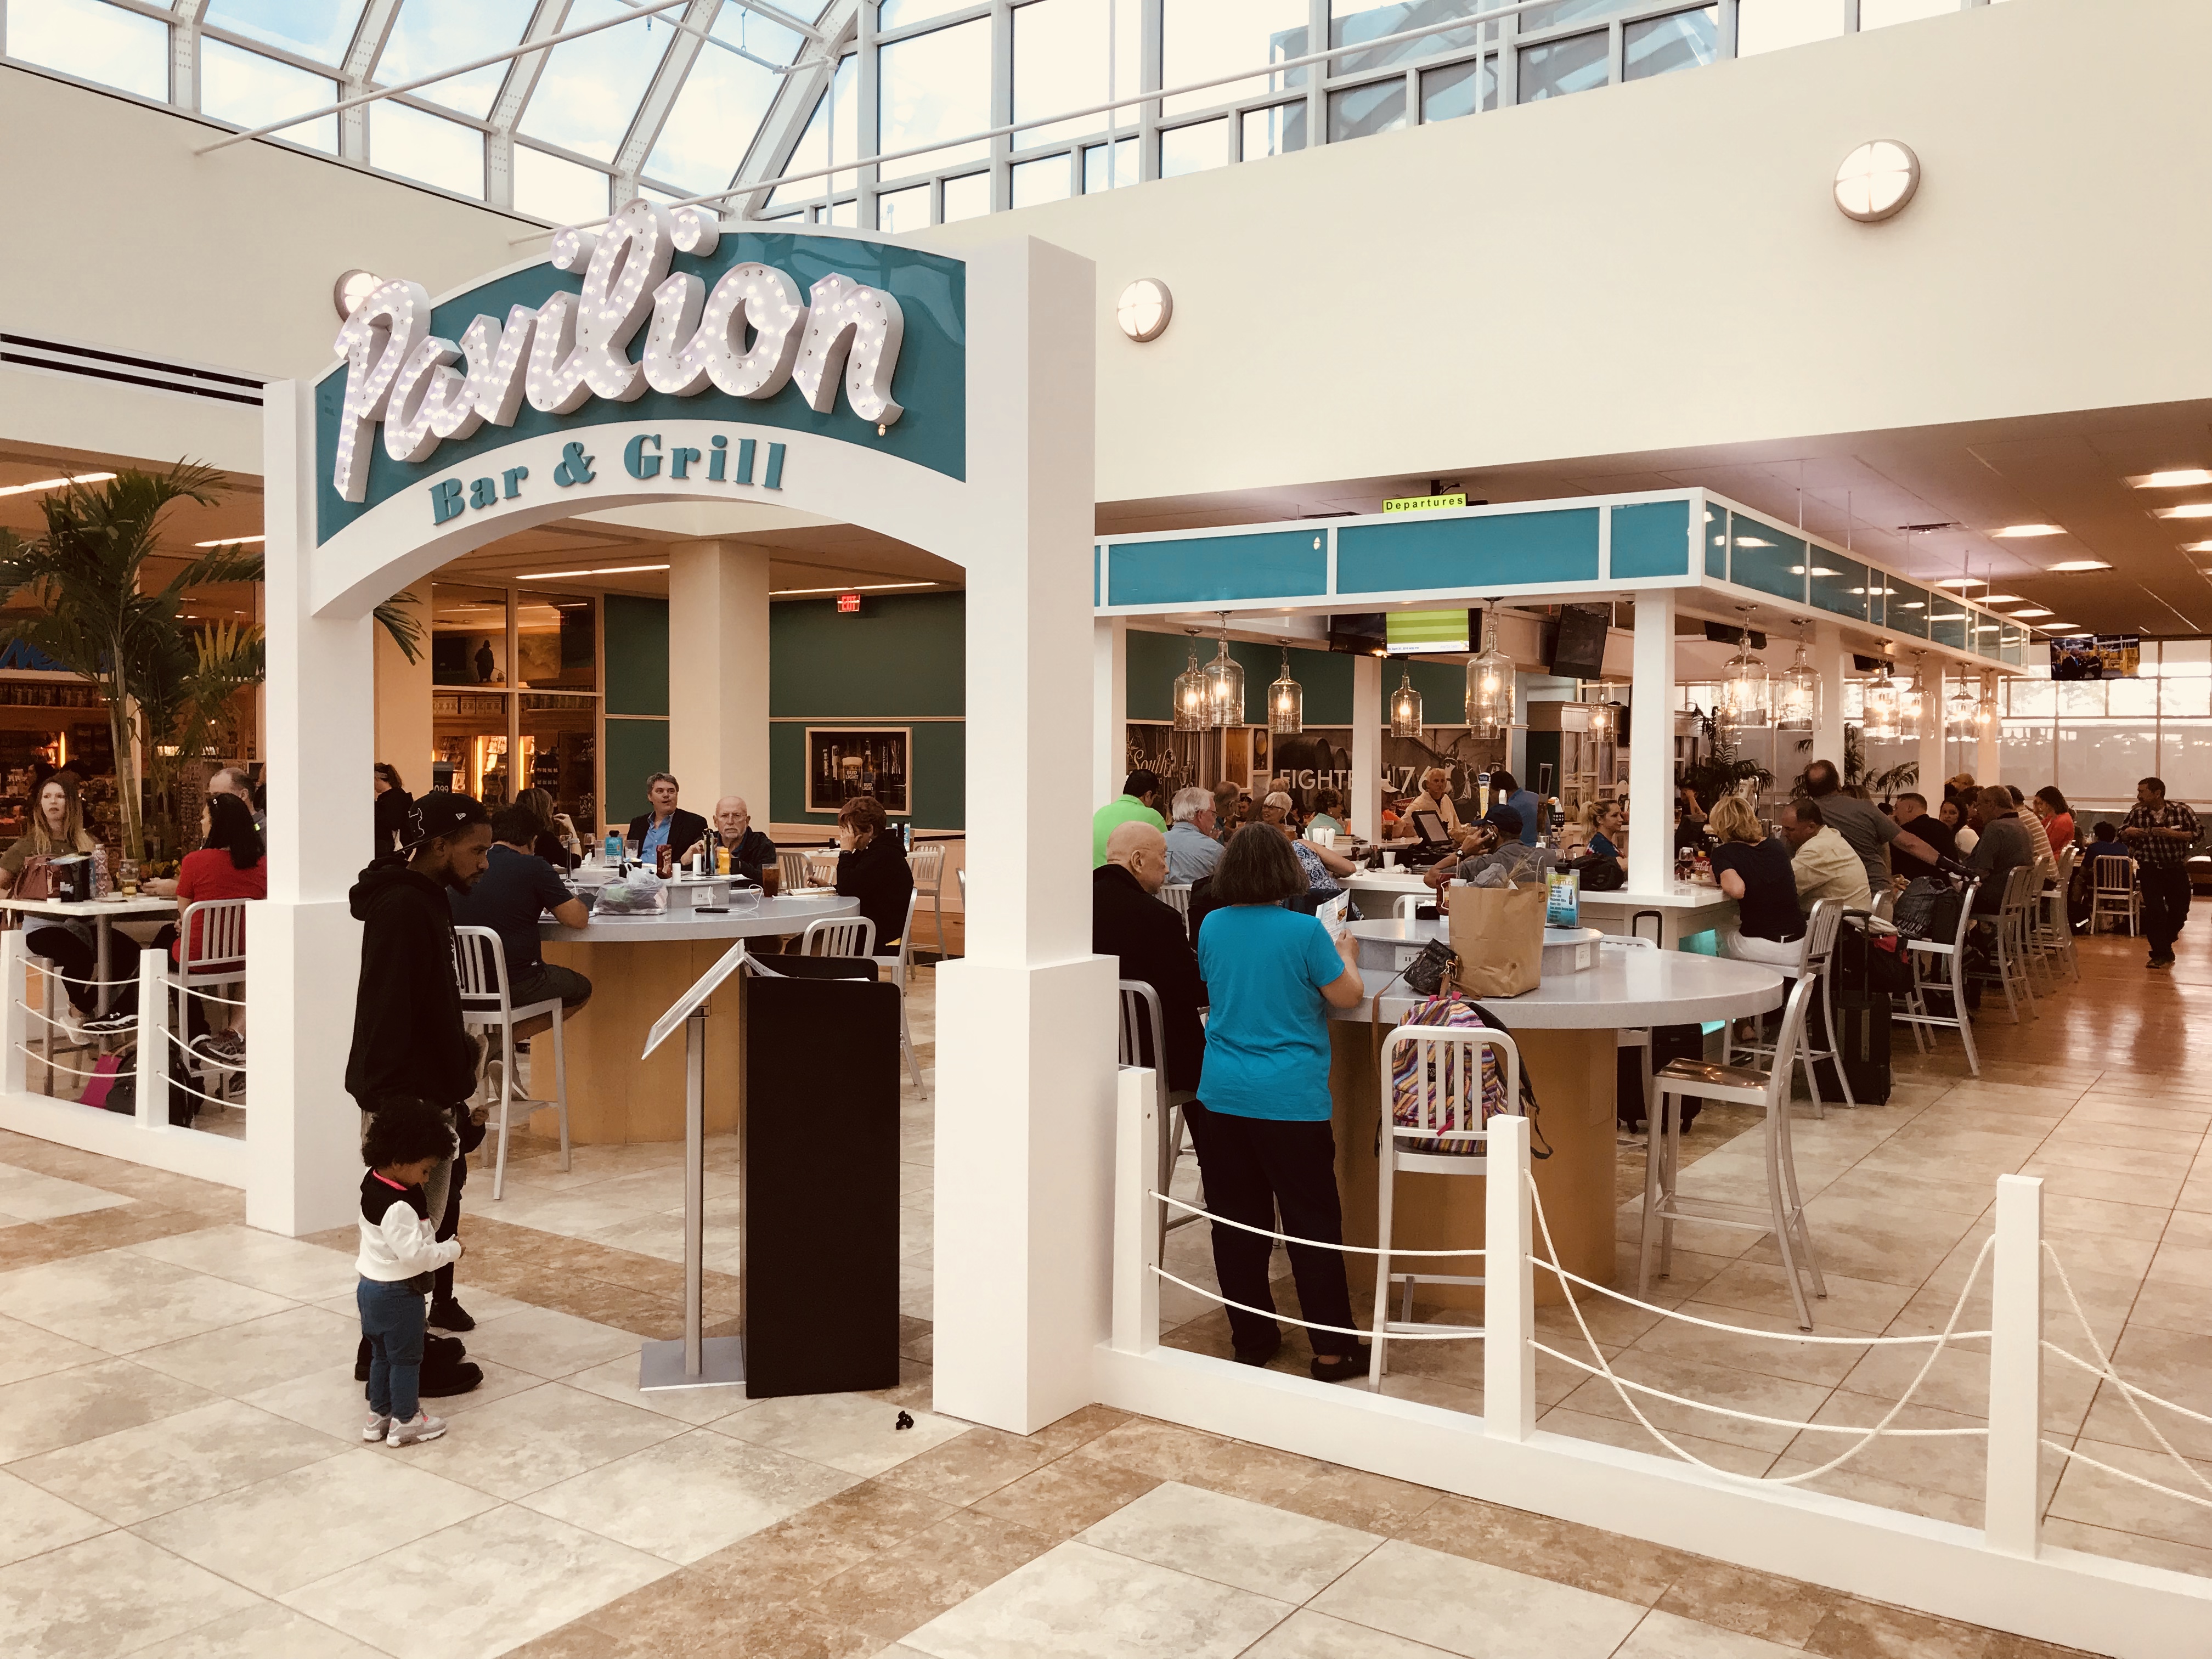 Pavilion Bar and Grill